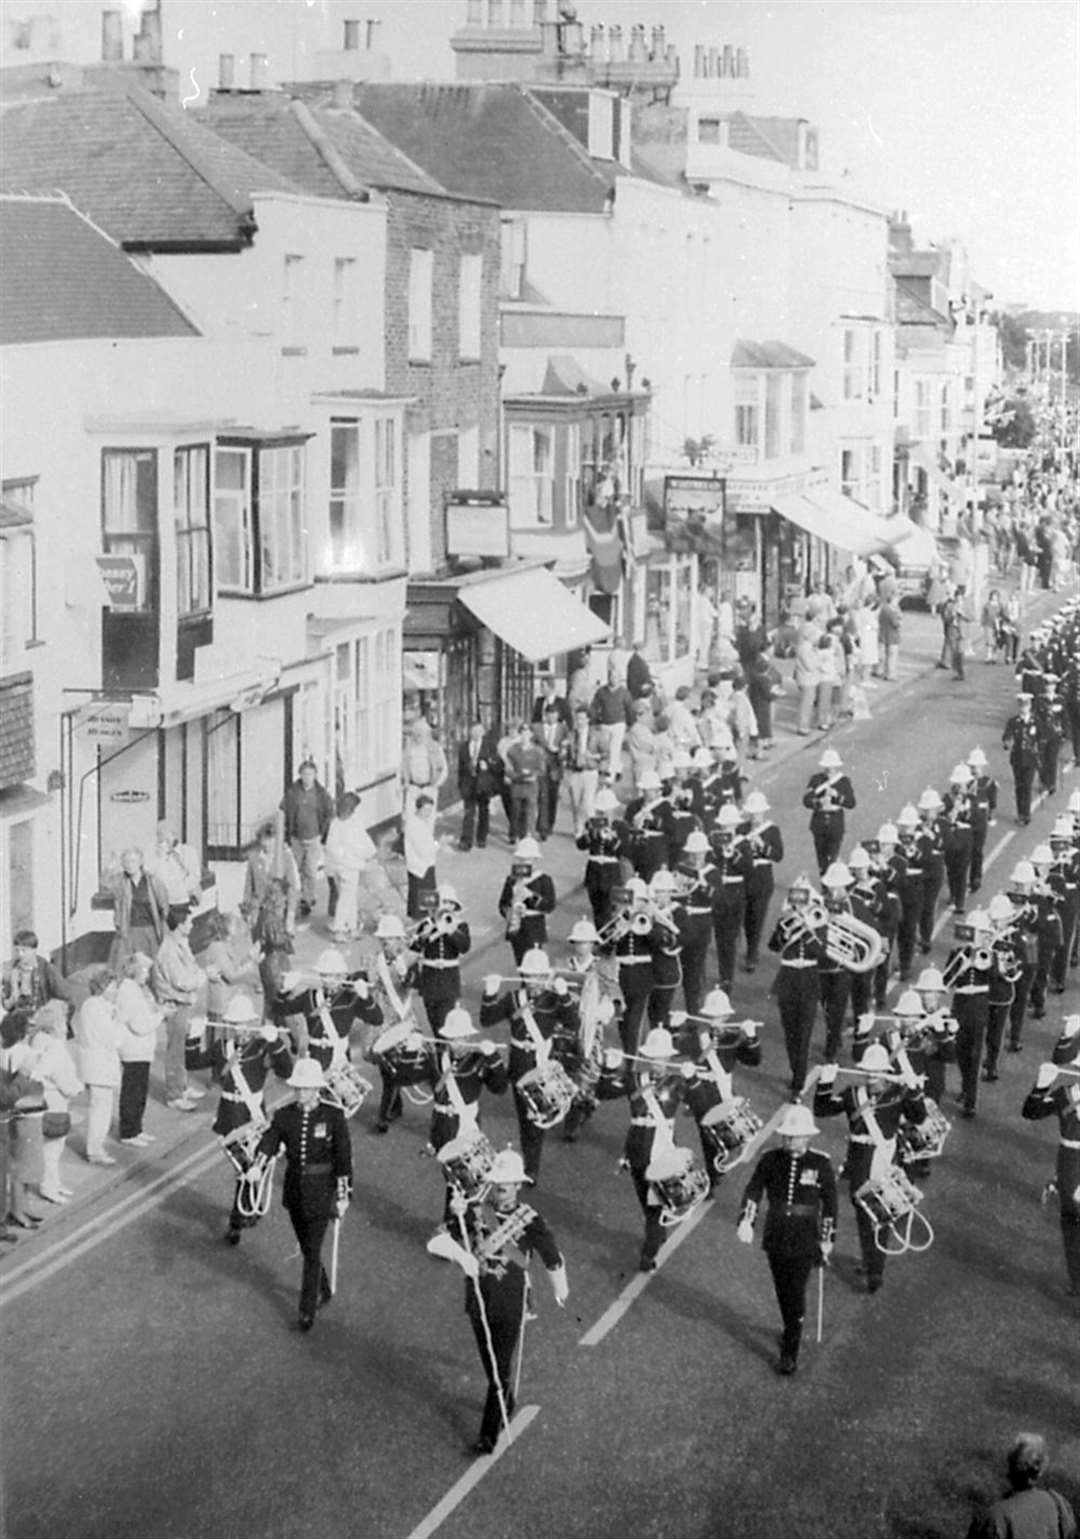 Townpeople watched as the band marched through the streets of Deal leaving empty spaces for those killed